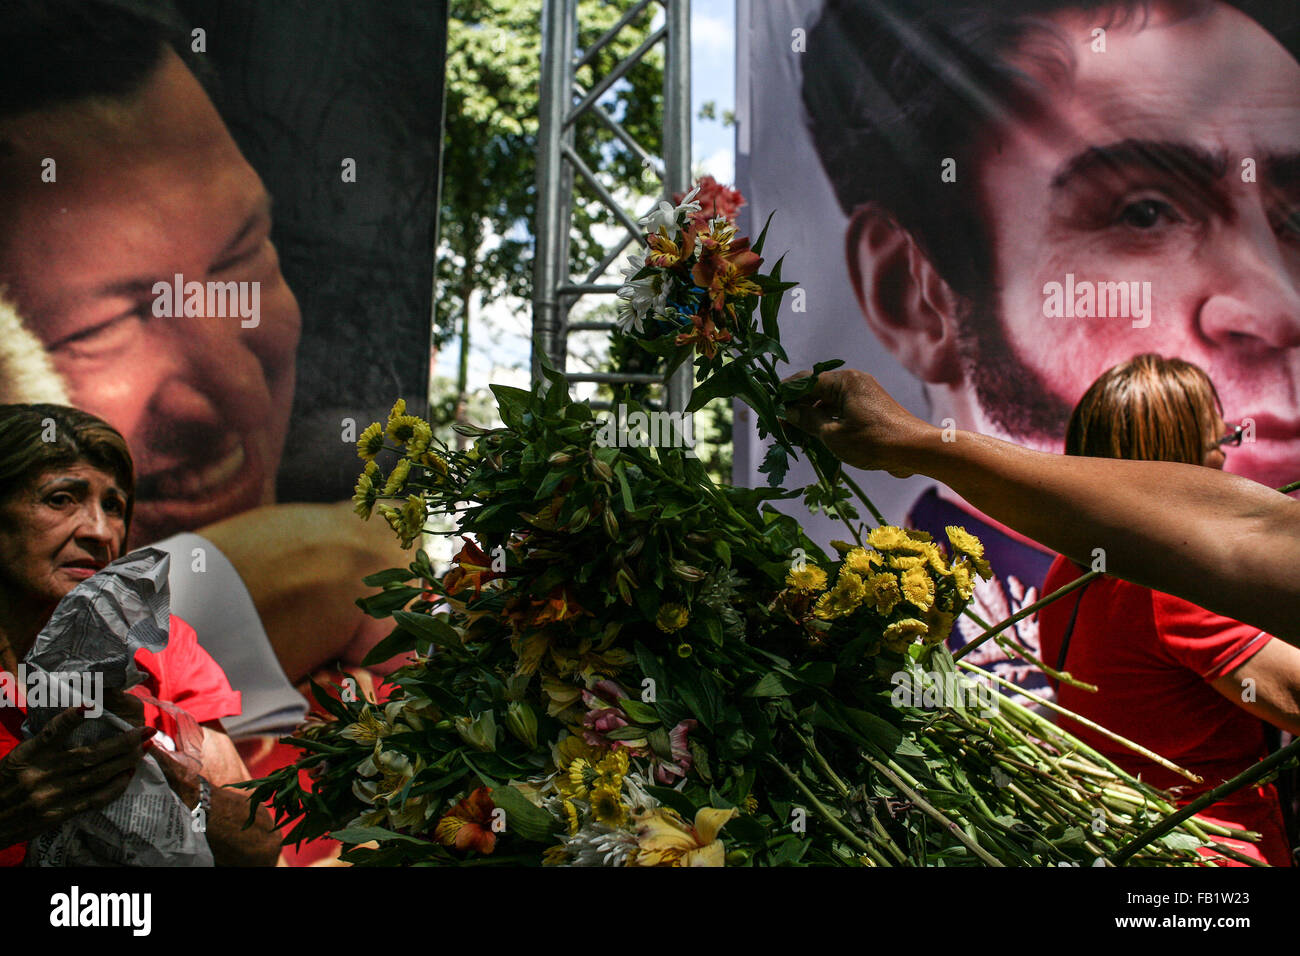 Caracas, Venezuela. 7th Jan, 2016. Members of social movements lay a wreath in front of the images of Simon Bolivar, the founding father of Venezuelan Independence, and late Venezuelan President Hugo Chavez, during a rally held by members of social movements to reject the removal of images of Simon Bolivar and late Venezuelan President Hugo Chavez from the National Assembly, around the Plaza Bolivar in Caracas, Venezuela, on Jan. 7, 2016. Credit:  Boris Vergara/Xinhua/Alamy Live News Stock Photo